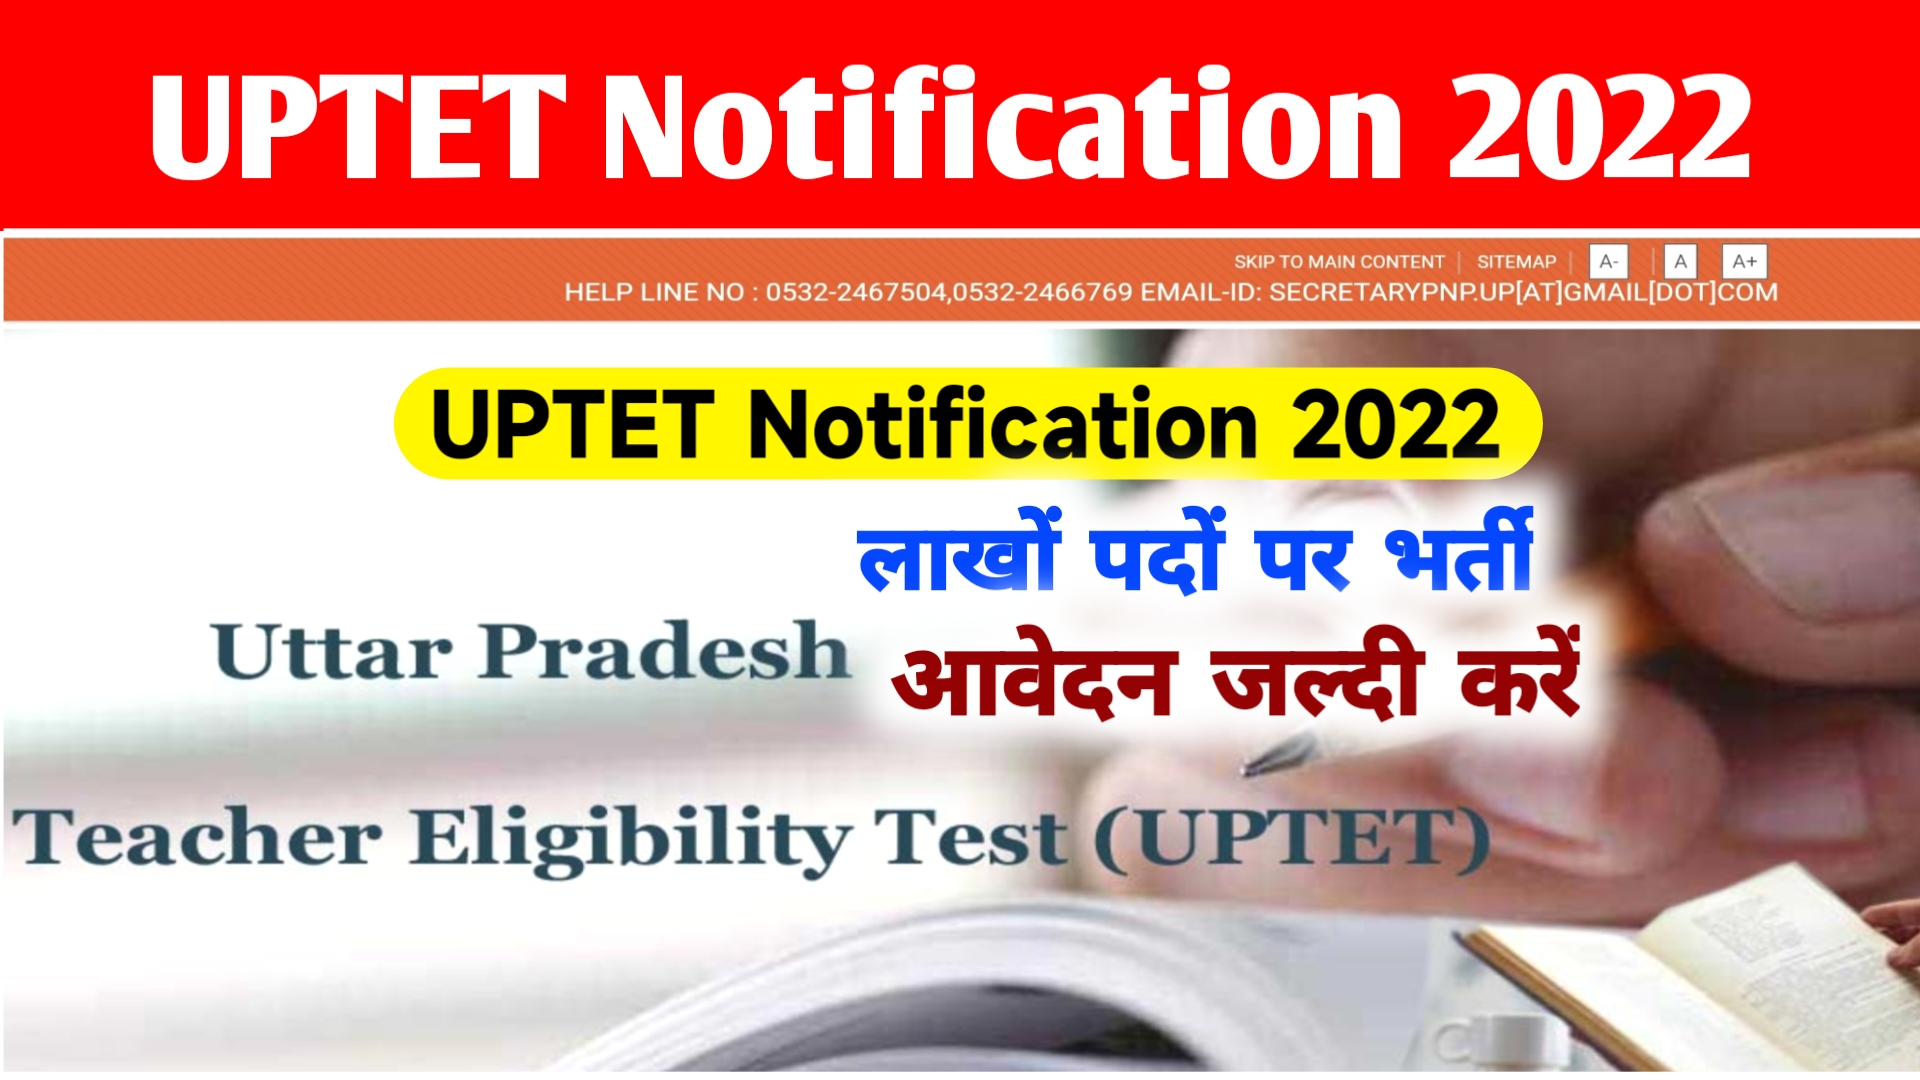 UPTET Notification 2022 @updeled.gov.in Exam Dates,Pattern and Syllabus